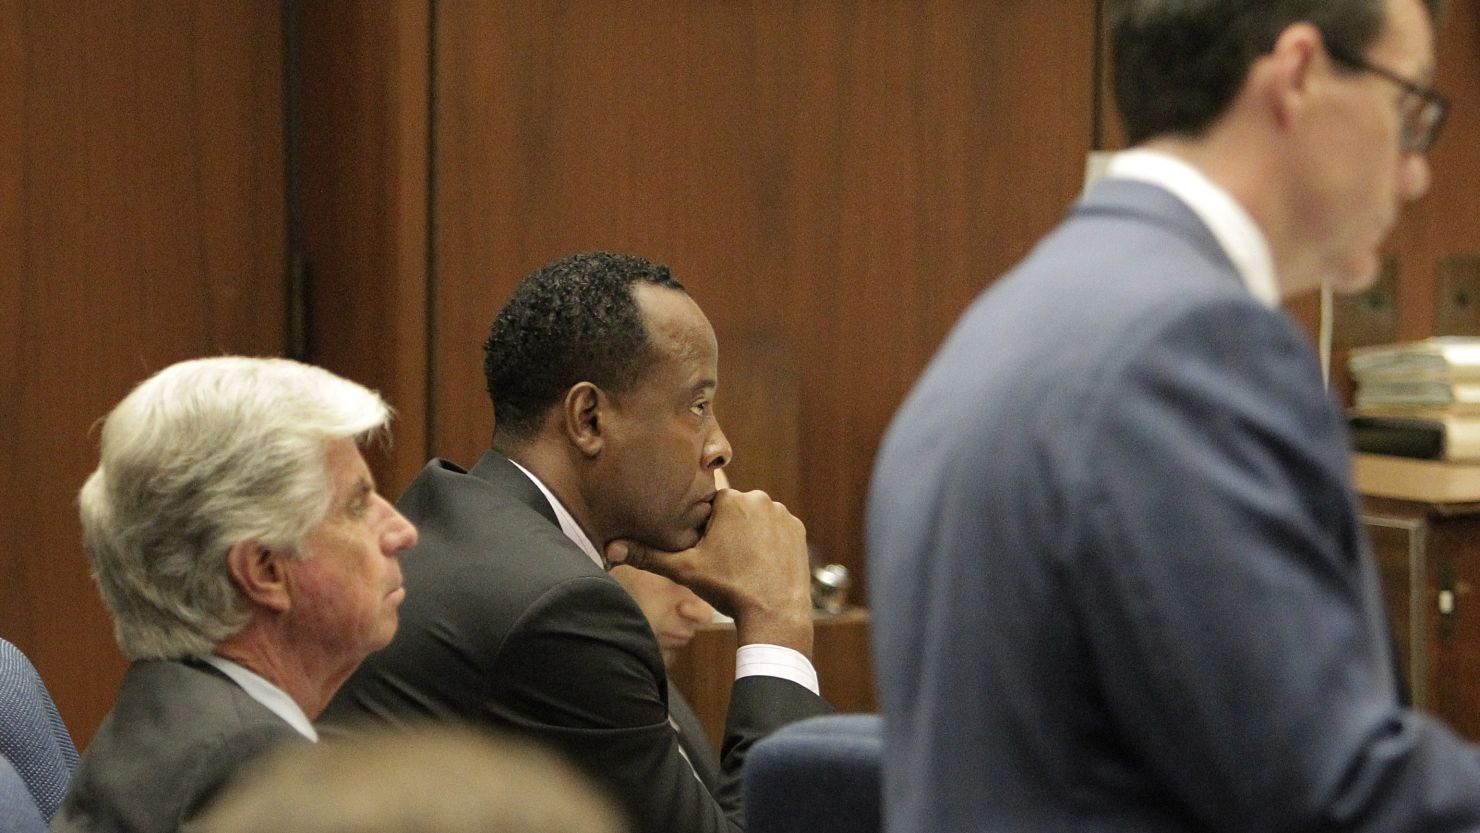  Dr. Conrad Murray's lawyers will use the next four days to challenge the prosecution's contention that he is responsible for Michael Jackson's death.